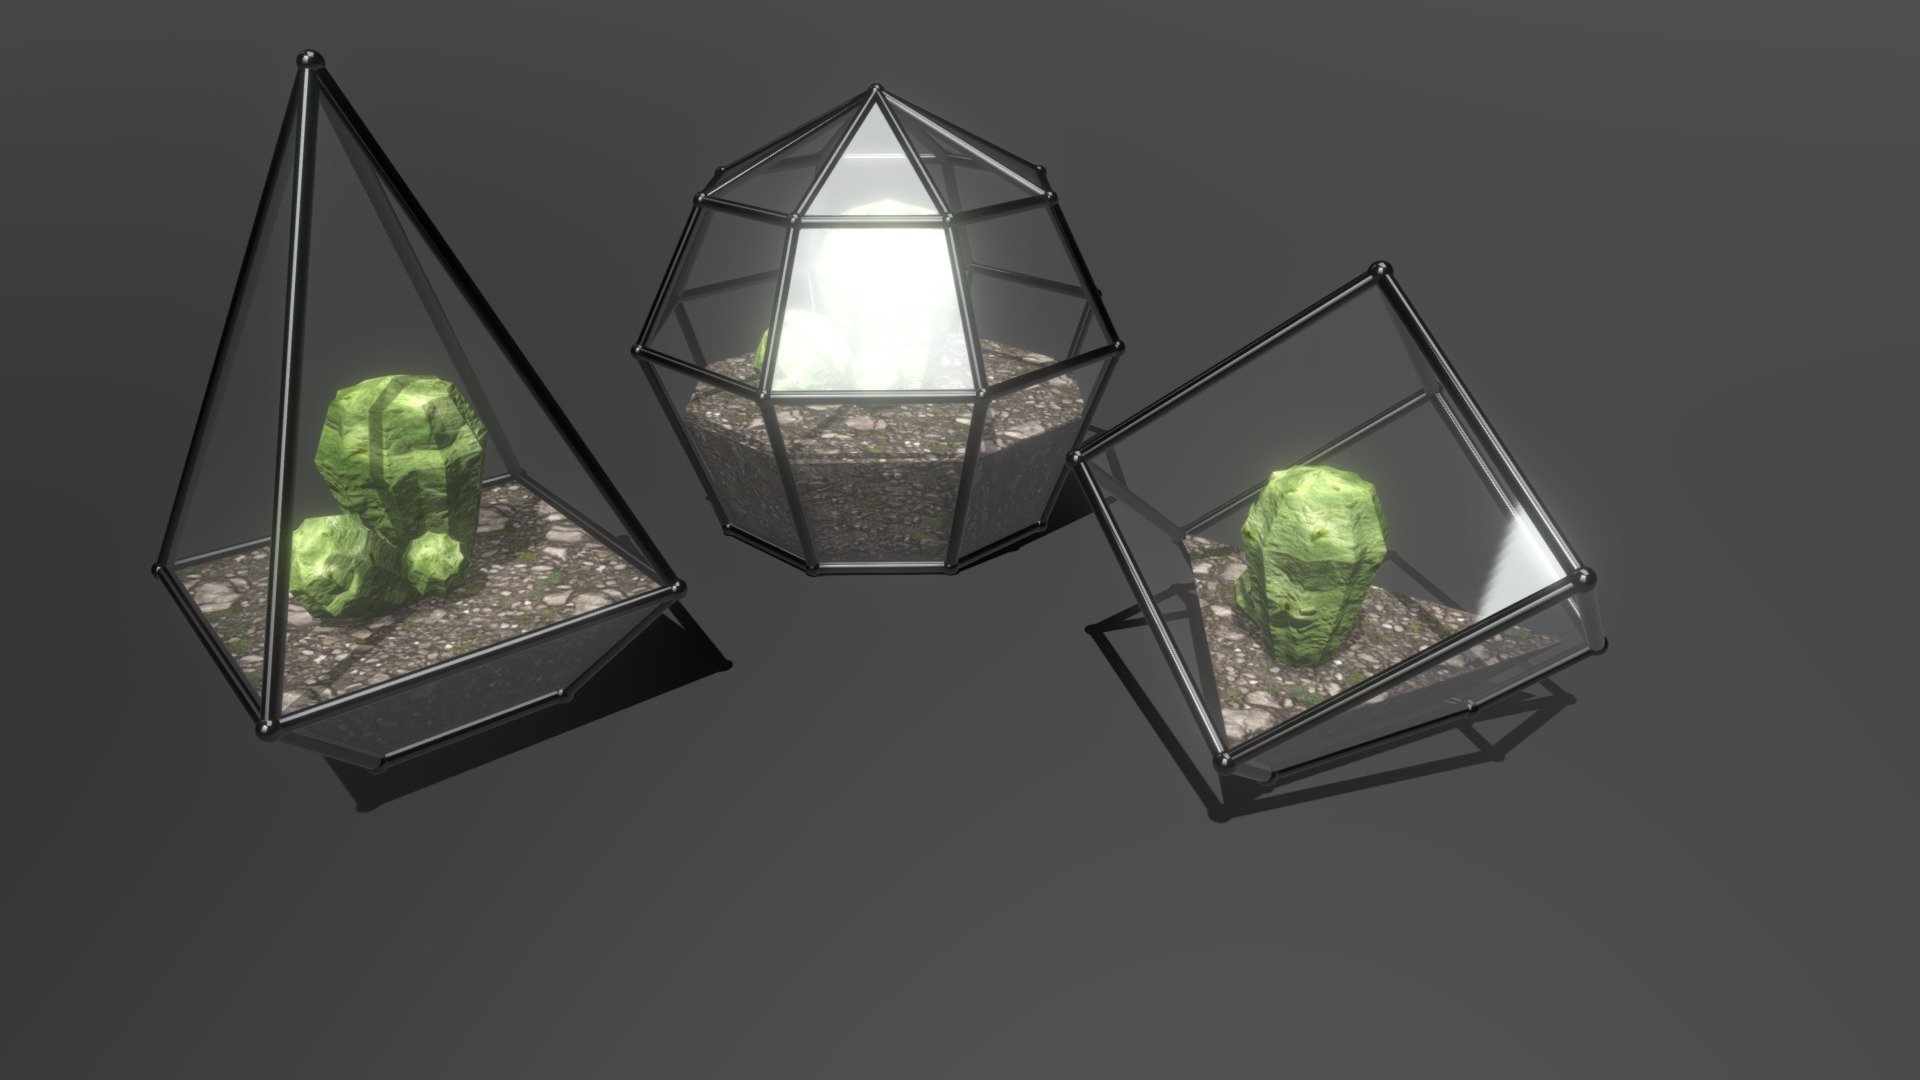 Low-poly set of 3 Florarium.
Florarium (terrarium for plants) is a small glass container with a small garden inside and its microclimate for plants. 
Created with 3Ds max2018. Export in FBX. Model have diffuse, opacity, normal texture maps 3d model